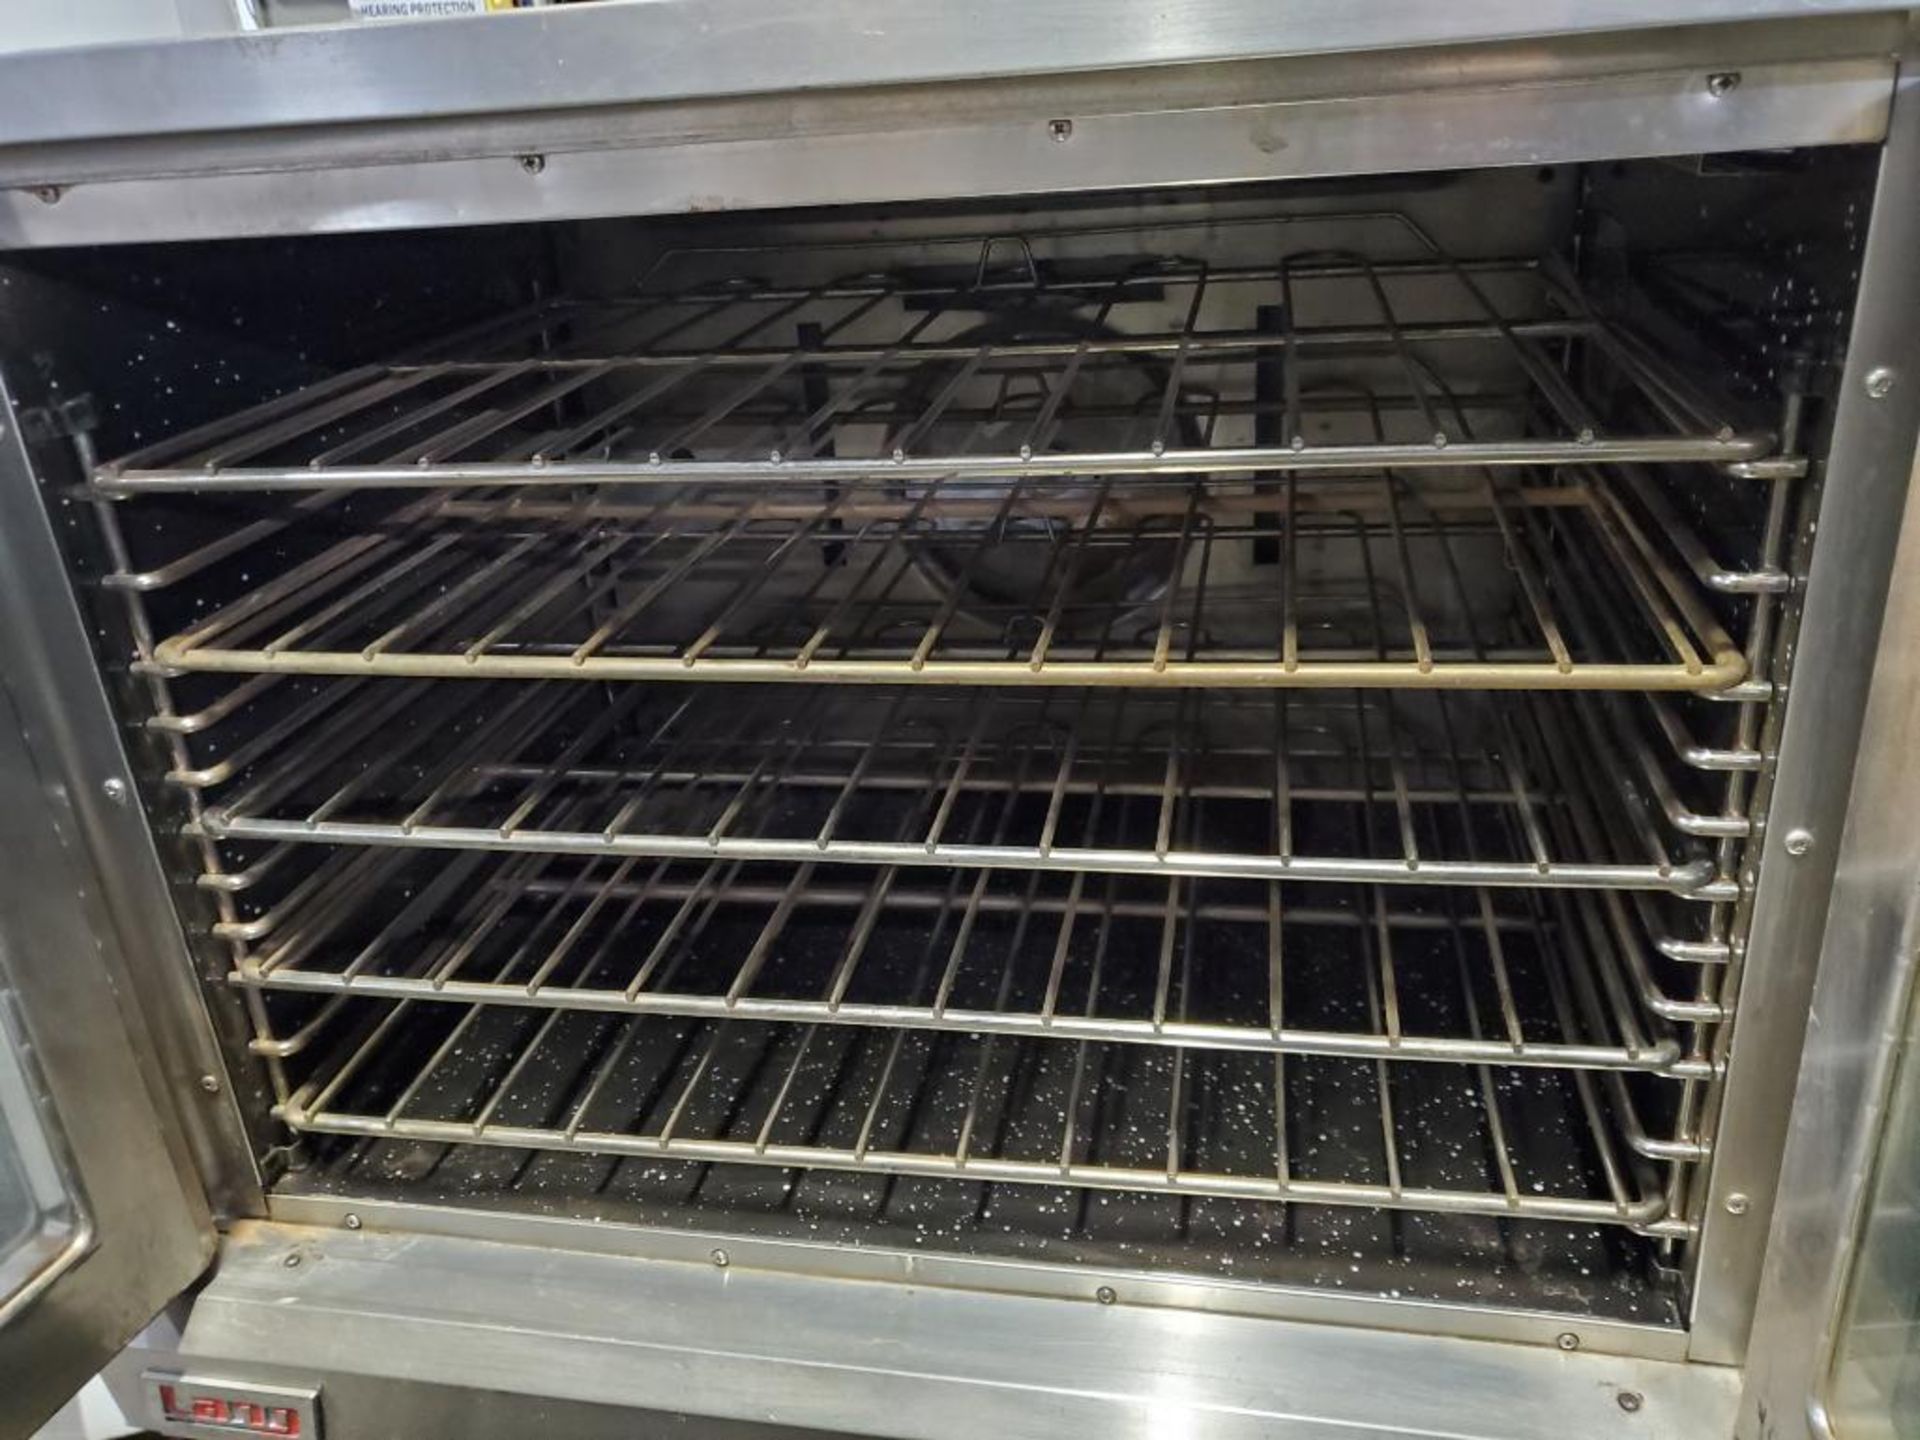 (2) Lang Accu-Plus Commercial Cook Ovens & Stainless Liquid Transfer Cart w/ (2) Tanks - Image 5 of 10